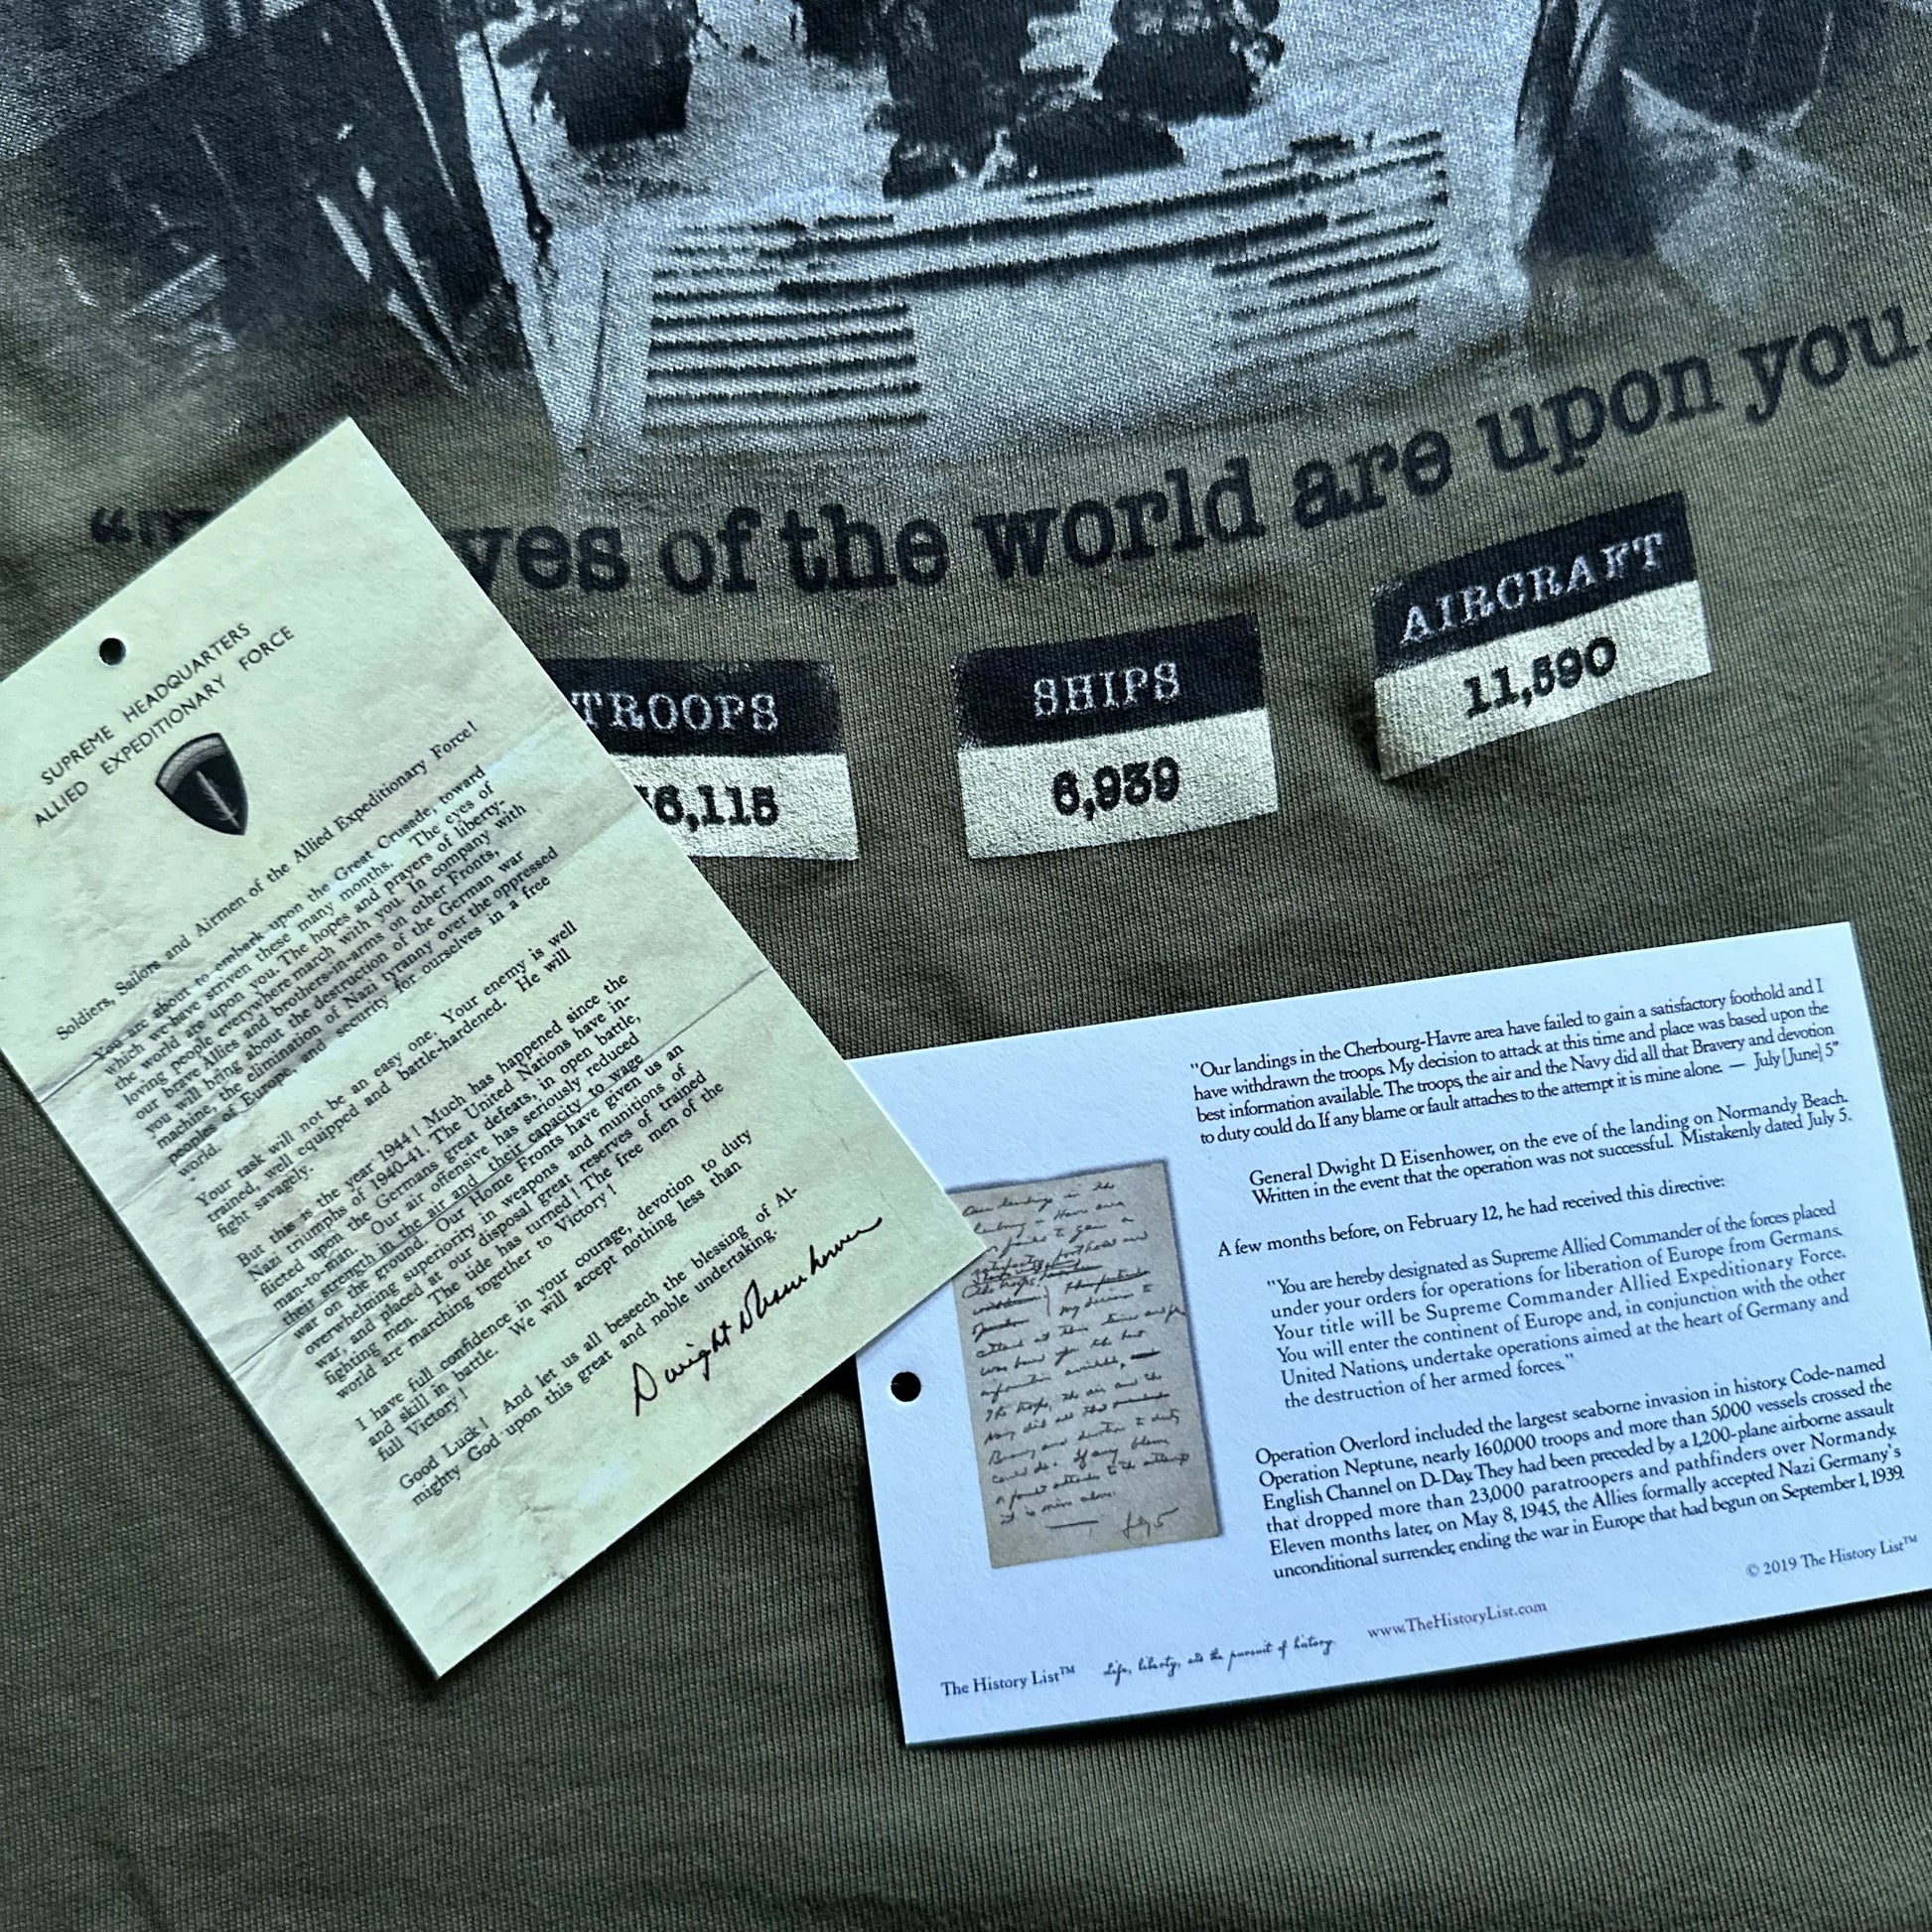 Hang tag of D-Day Operation Overlord Long-sleeved shirt from The History List store